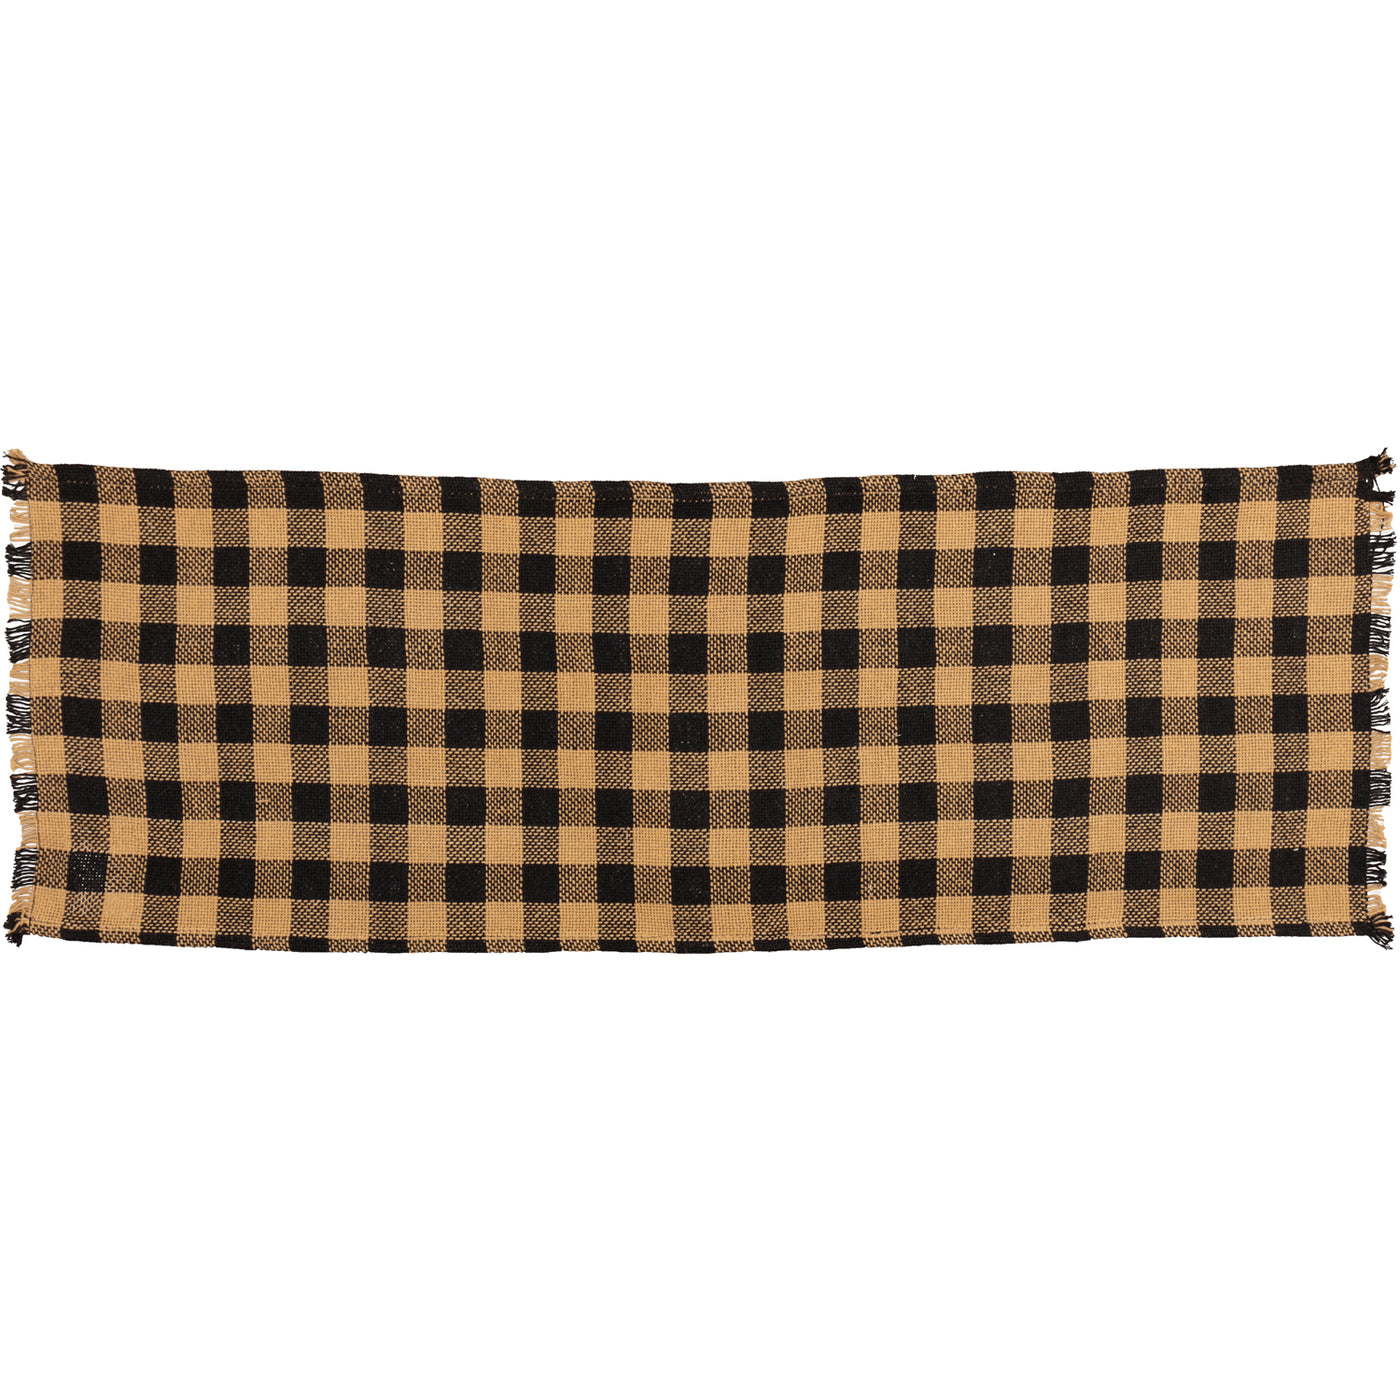 Burlap Black And Tan Check Fringed Table Runner 13" x 36"